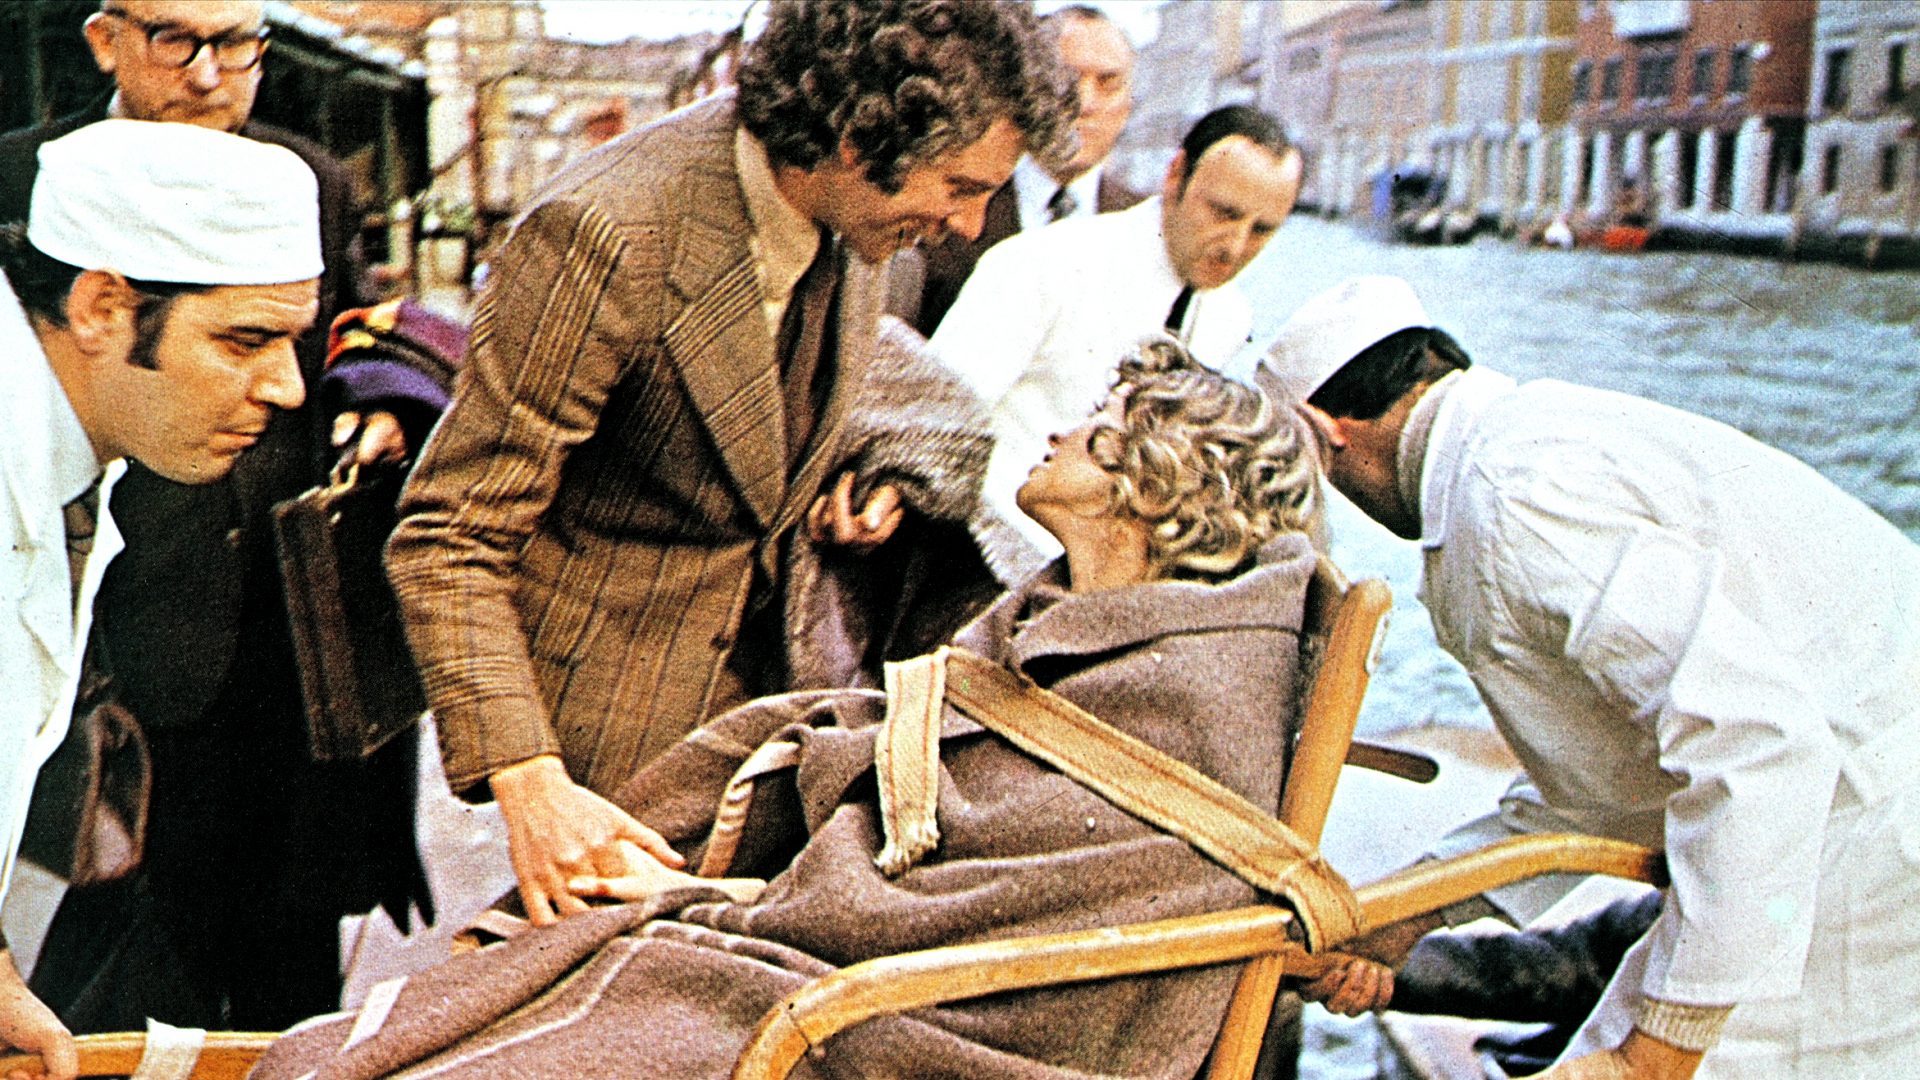 Behind the scenes of Don't Look Now